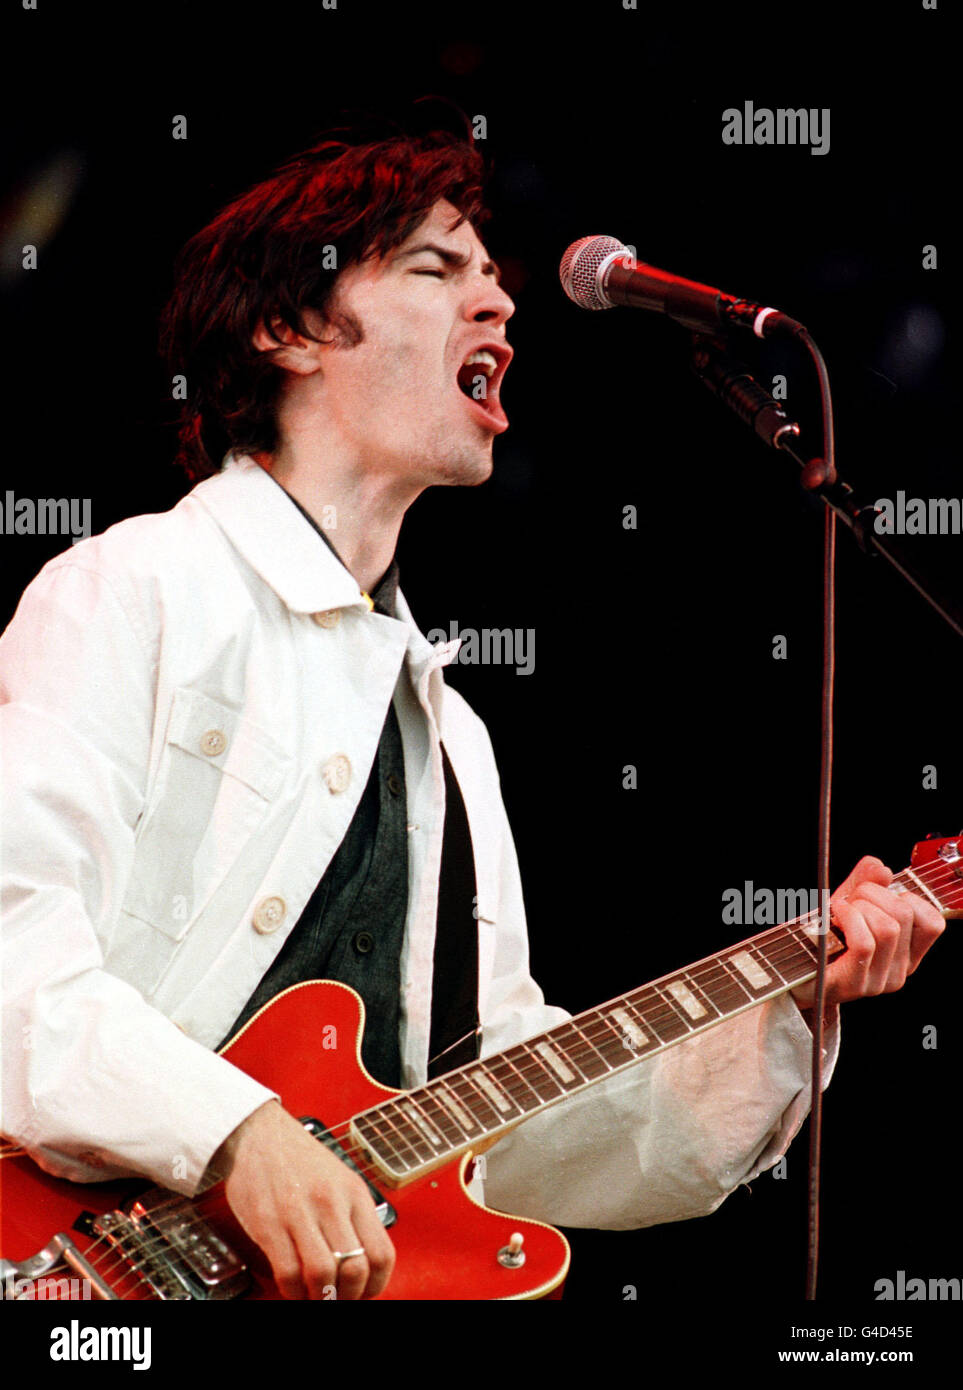 PA NEWS PHOTO 12/7/98 TOMMY SCOTT FROM THE BAND SPACE ON STAGE AT THE T IN THE PARK FESTIVAL IN EDINBURGH. Stock Photo